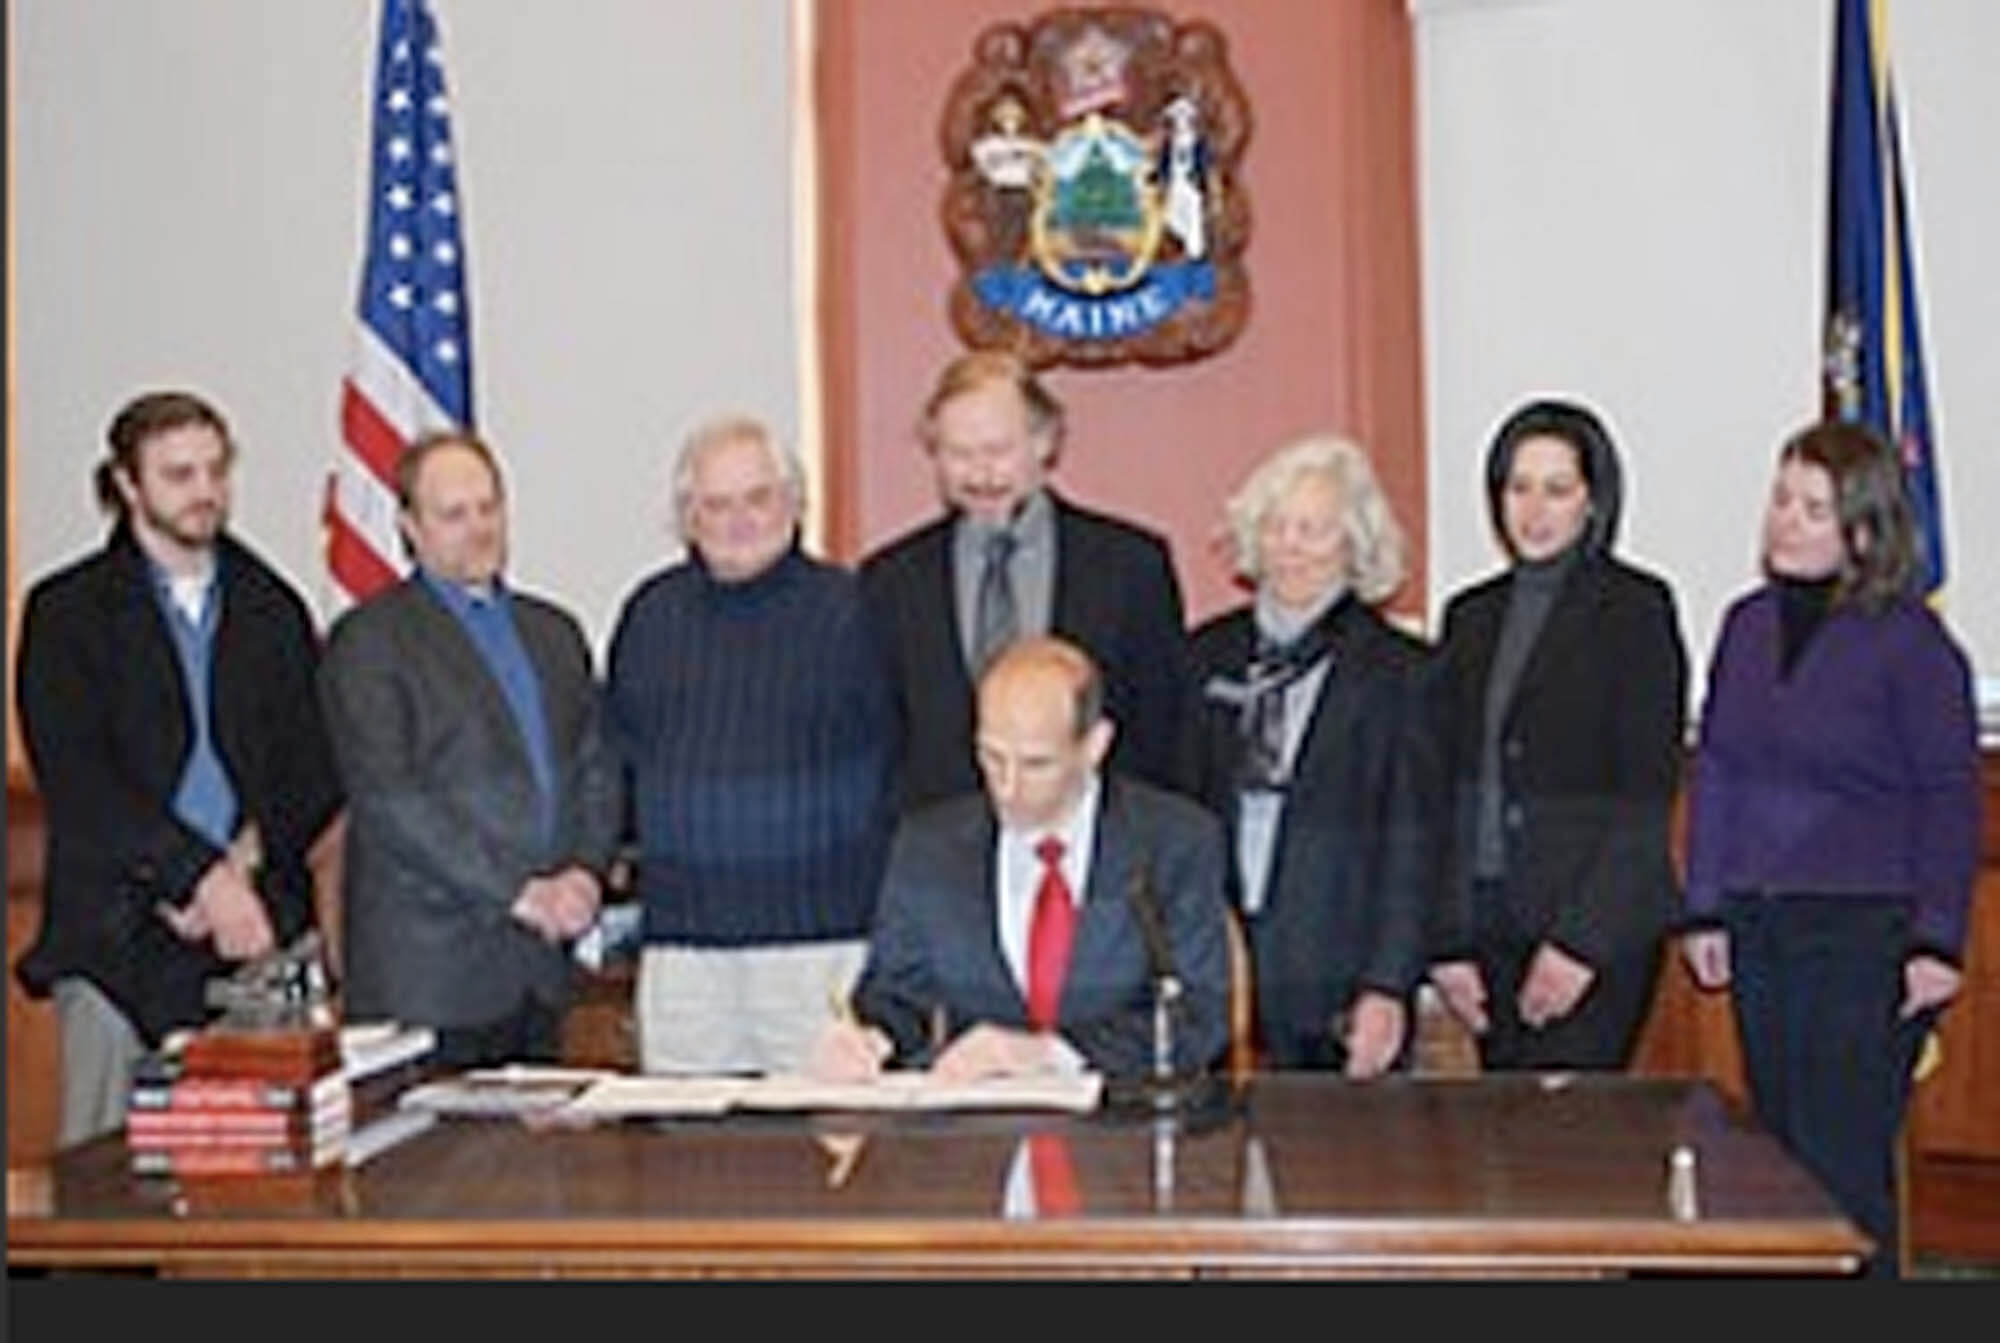 In February 2010 Governor John Baldacci signed a bill granting the school permanent authority to confer a Master of Fine Arts degree. From left to right: Faculty, Tim McLaughlin, MFA Program Chair, Howard Greenberg, Registrar, Kerry Curren, Maine Media College President, Charles Altschul, Governor John Baldacci, State Representative and Founding Board member Joan Welsh, Provost, Elizabeth Greenberg, Director of Marketing, Kate Fletcher.